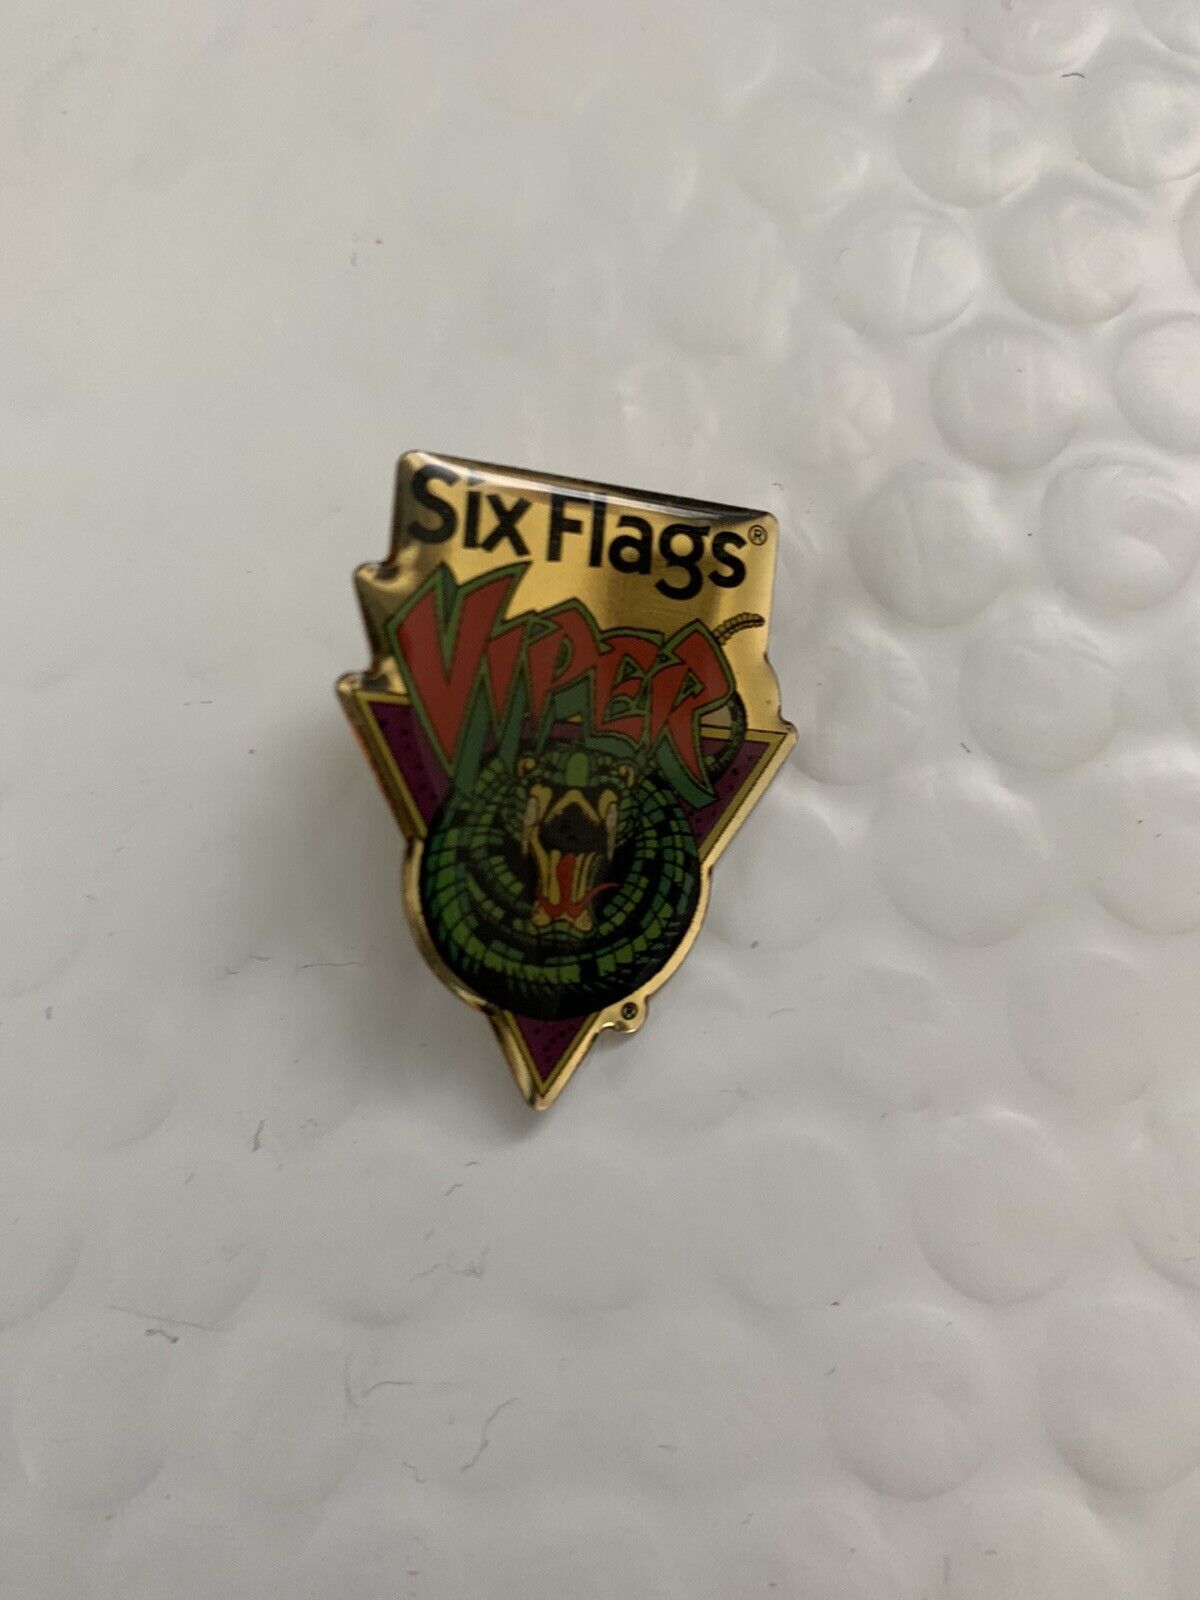 Viper Roller Coaster Pin Discontinued Six Flags 1995 Vintage